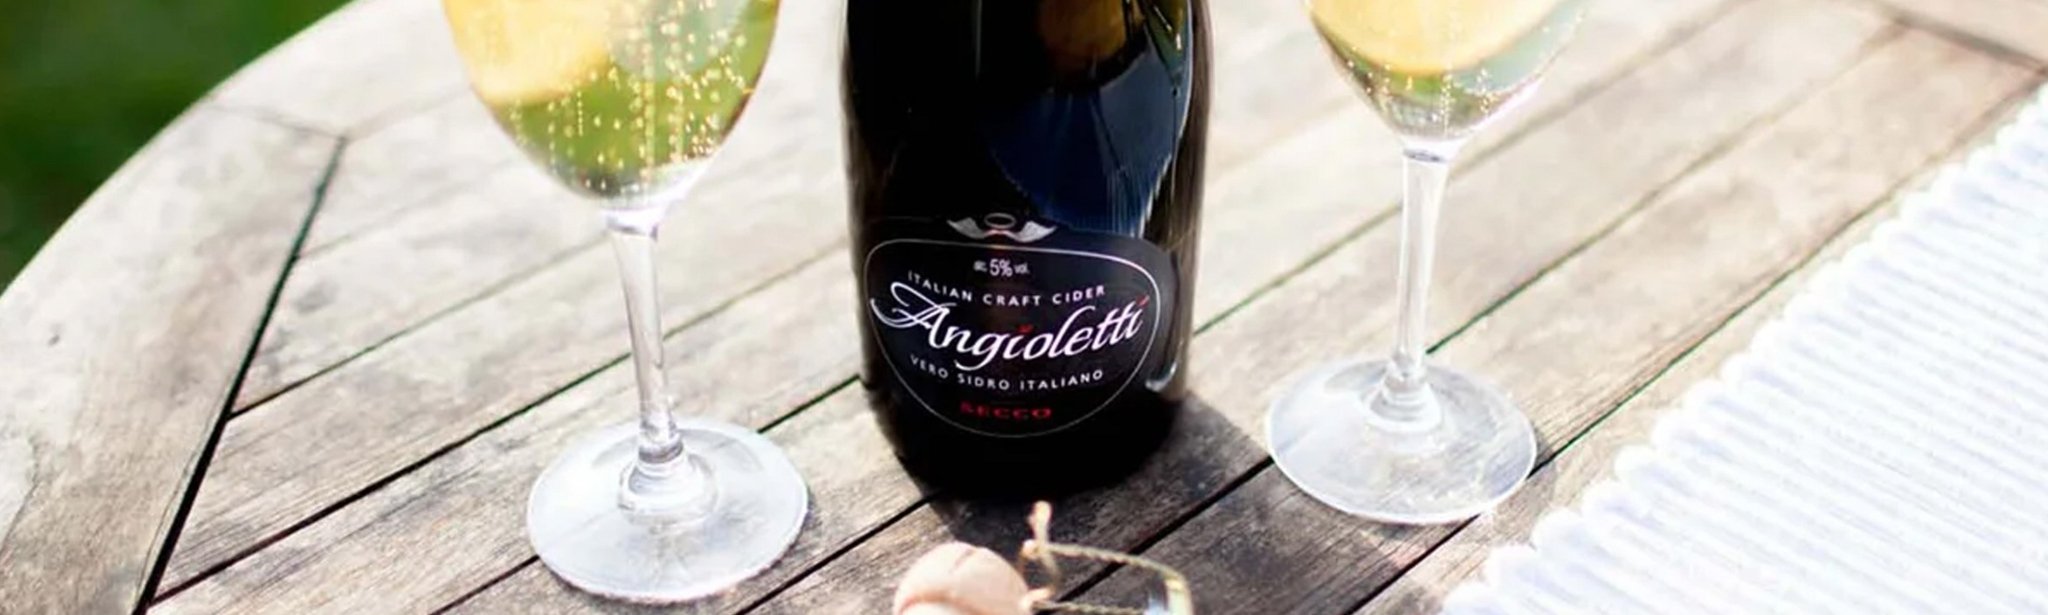 Angioletti - The Bottle Club